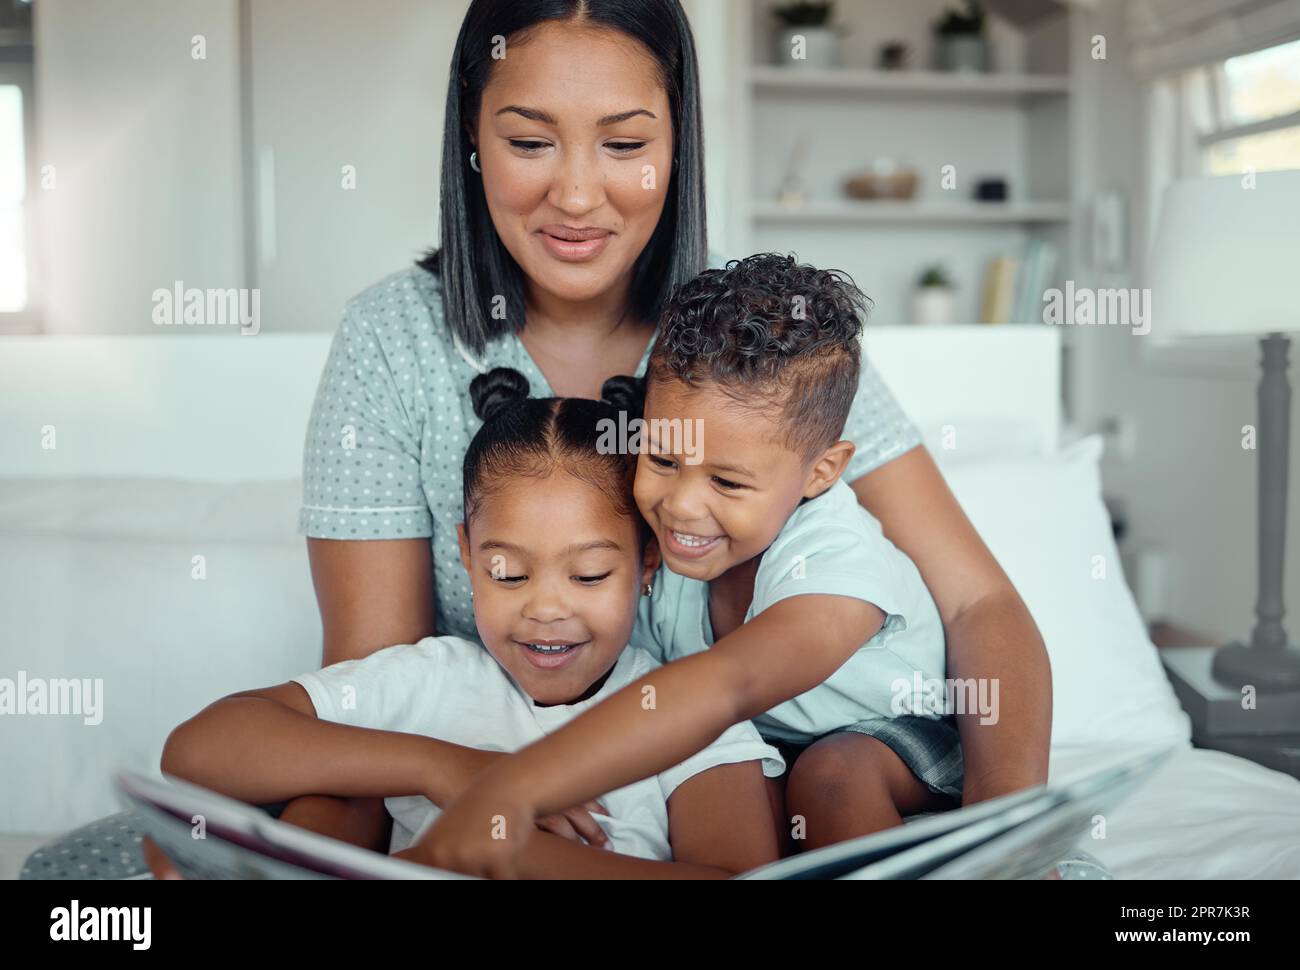 Young mixed race mother reading a storybook while relaxing at home with her two children. Smiling parent telling small kids funny fairy tale story kids pointing at book while they sit together Stock Photo